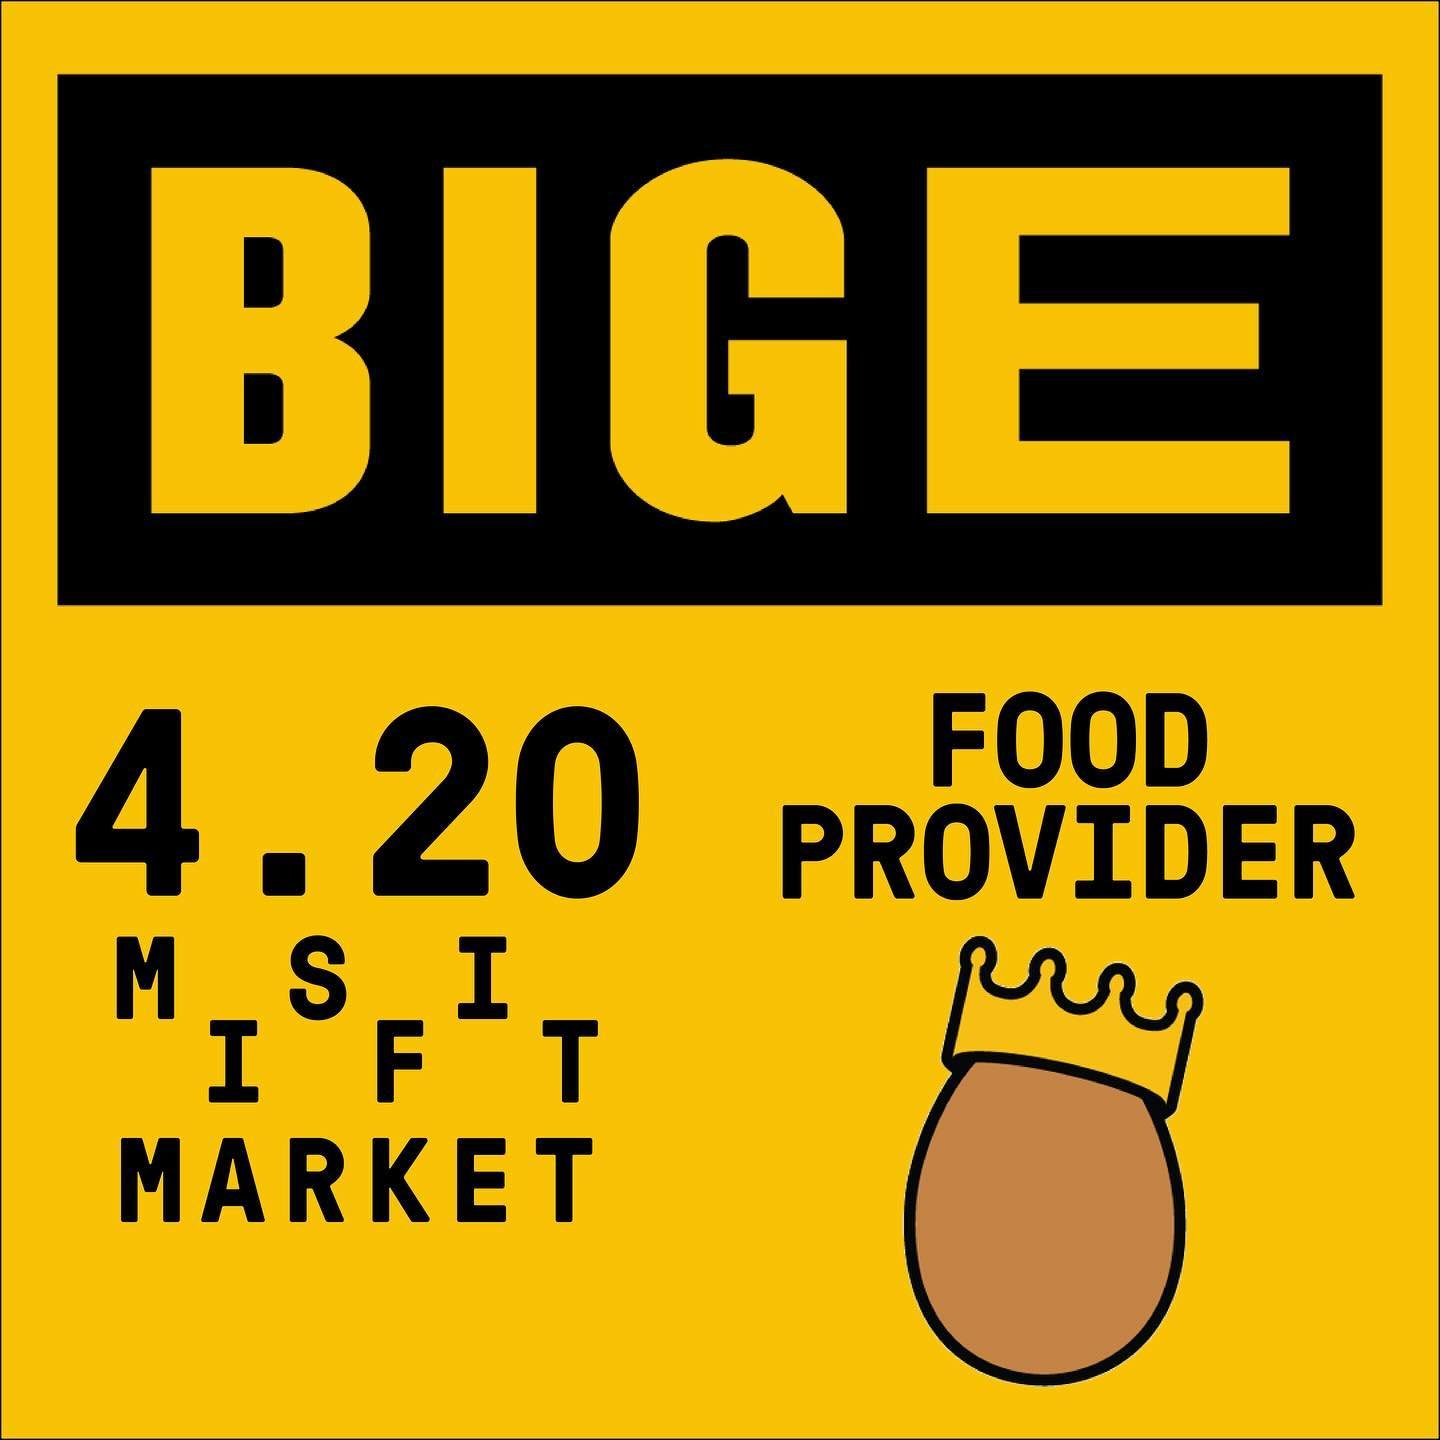 Big nEws! 
@eatbige is the food provider for our 4/20 market 🥚 

Big E is the hustle. Working late while you&rsquo;re in bed and awake before you making breakfast. We are good founded fomo, fueling your extra grind with an egg on it. Inspired by mus